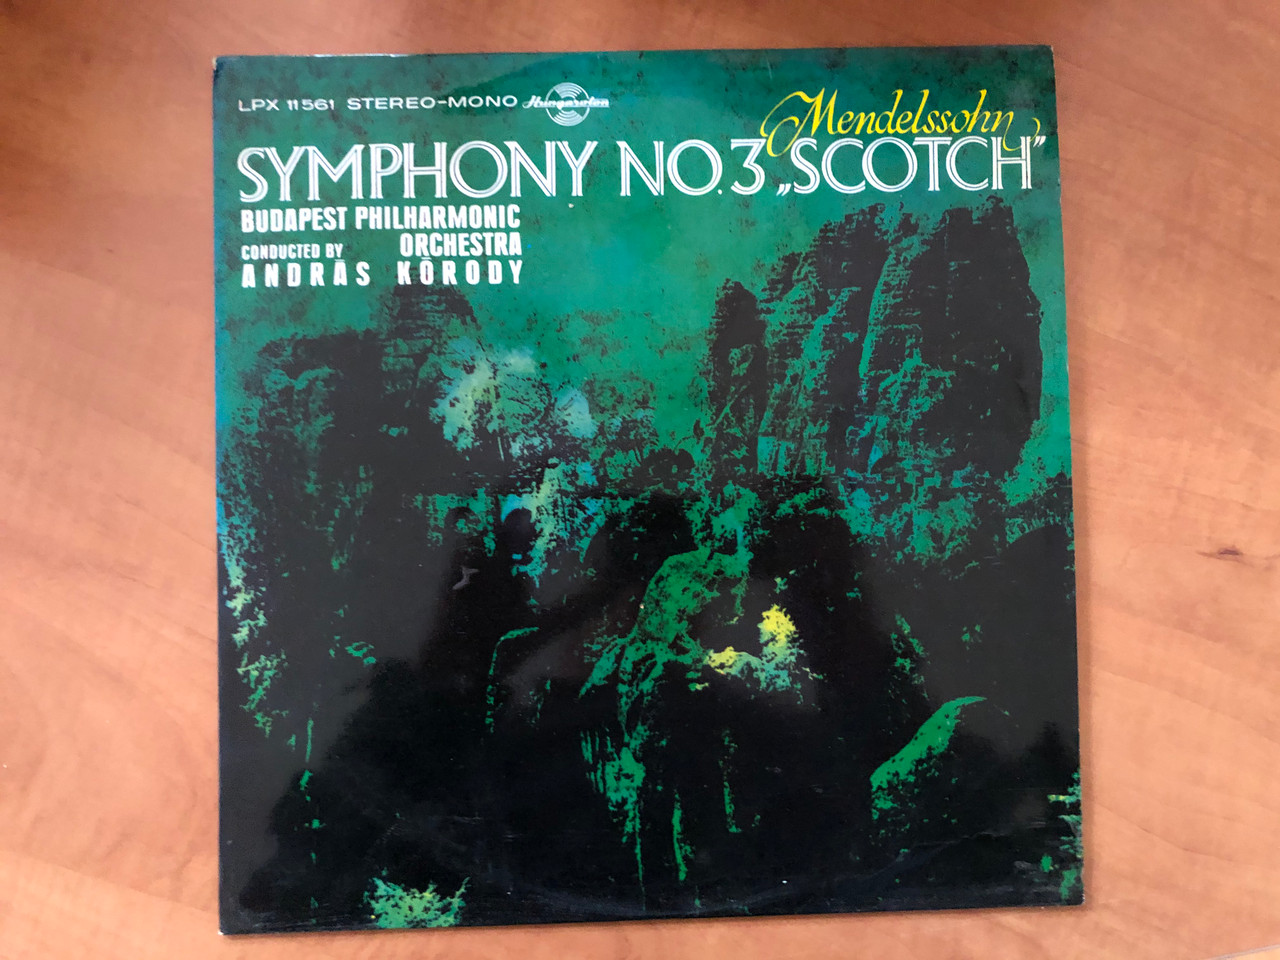 https://cdn10.bigcommerce.com/s-62bdpkt7pb/products/30903/images/182263/Mendelssohn_-_Symphony_No._3_Scotch_Budapest_Philharmonic_Orchestra_Conducted_by_Andrs_Krody_Hungaroton_LP_Stereo_Mono_LPX_11561_1__89862.1624393781.1280.1280.JPG?c=2